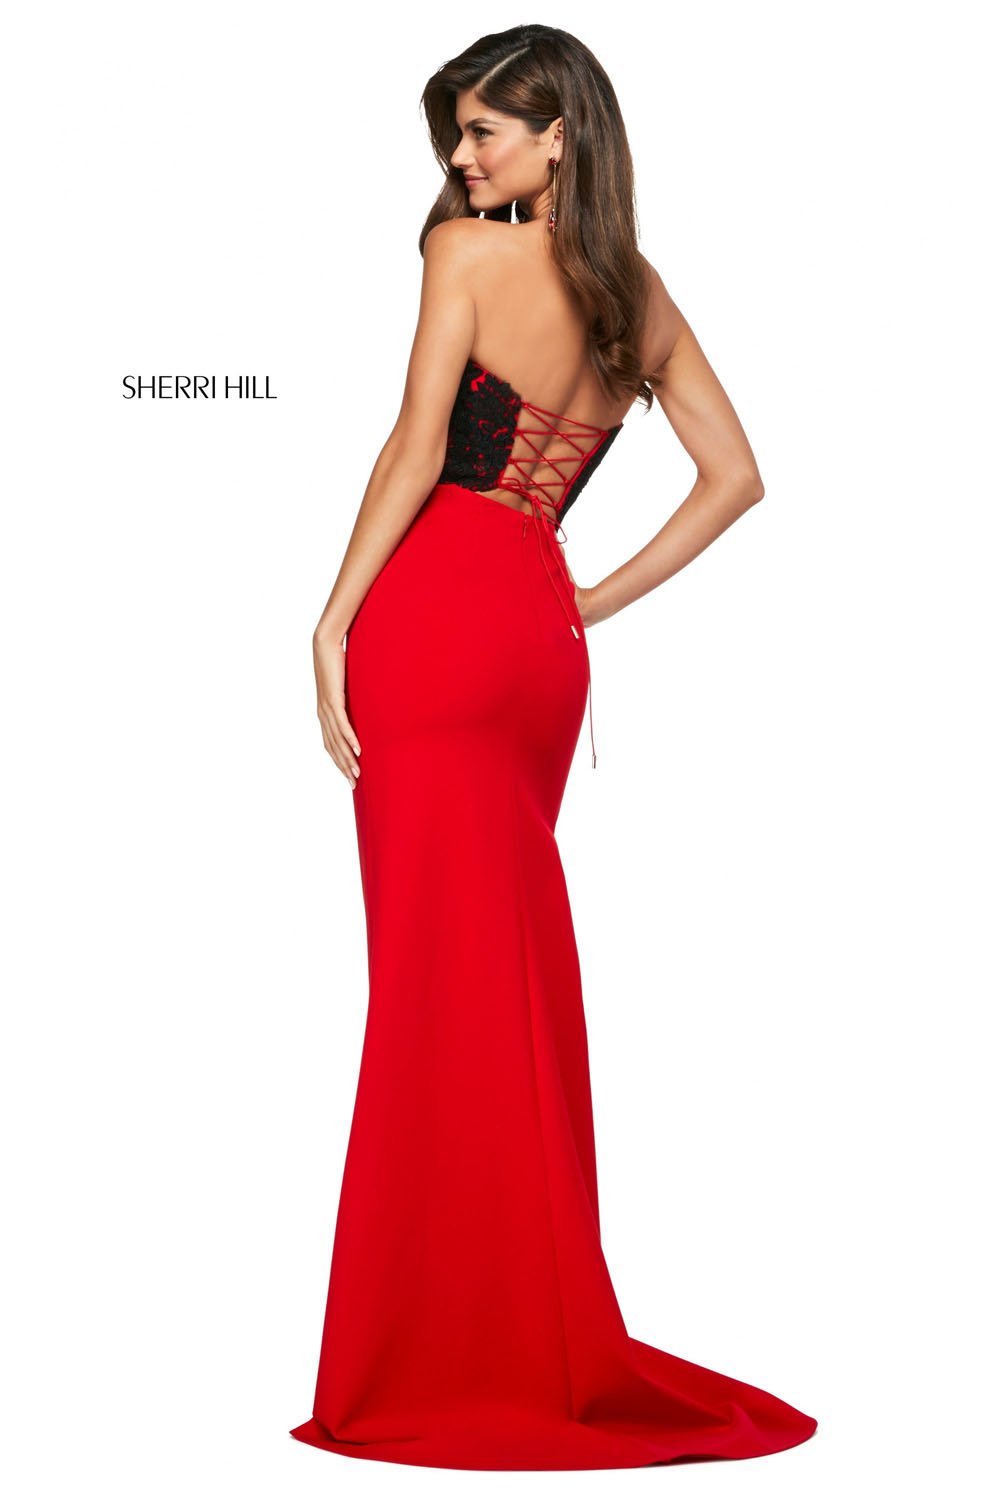 Sherri Hill 53601 dress images in these colors: Ivory Black, Red Black, Black.